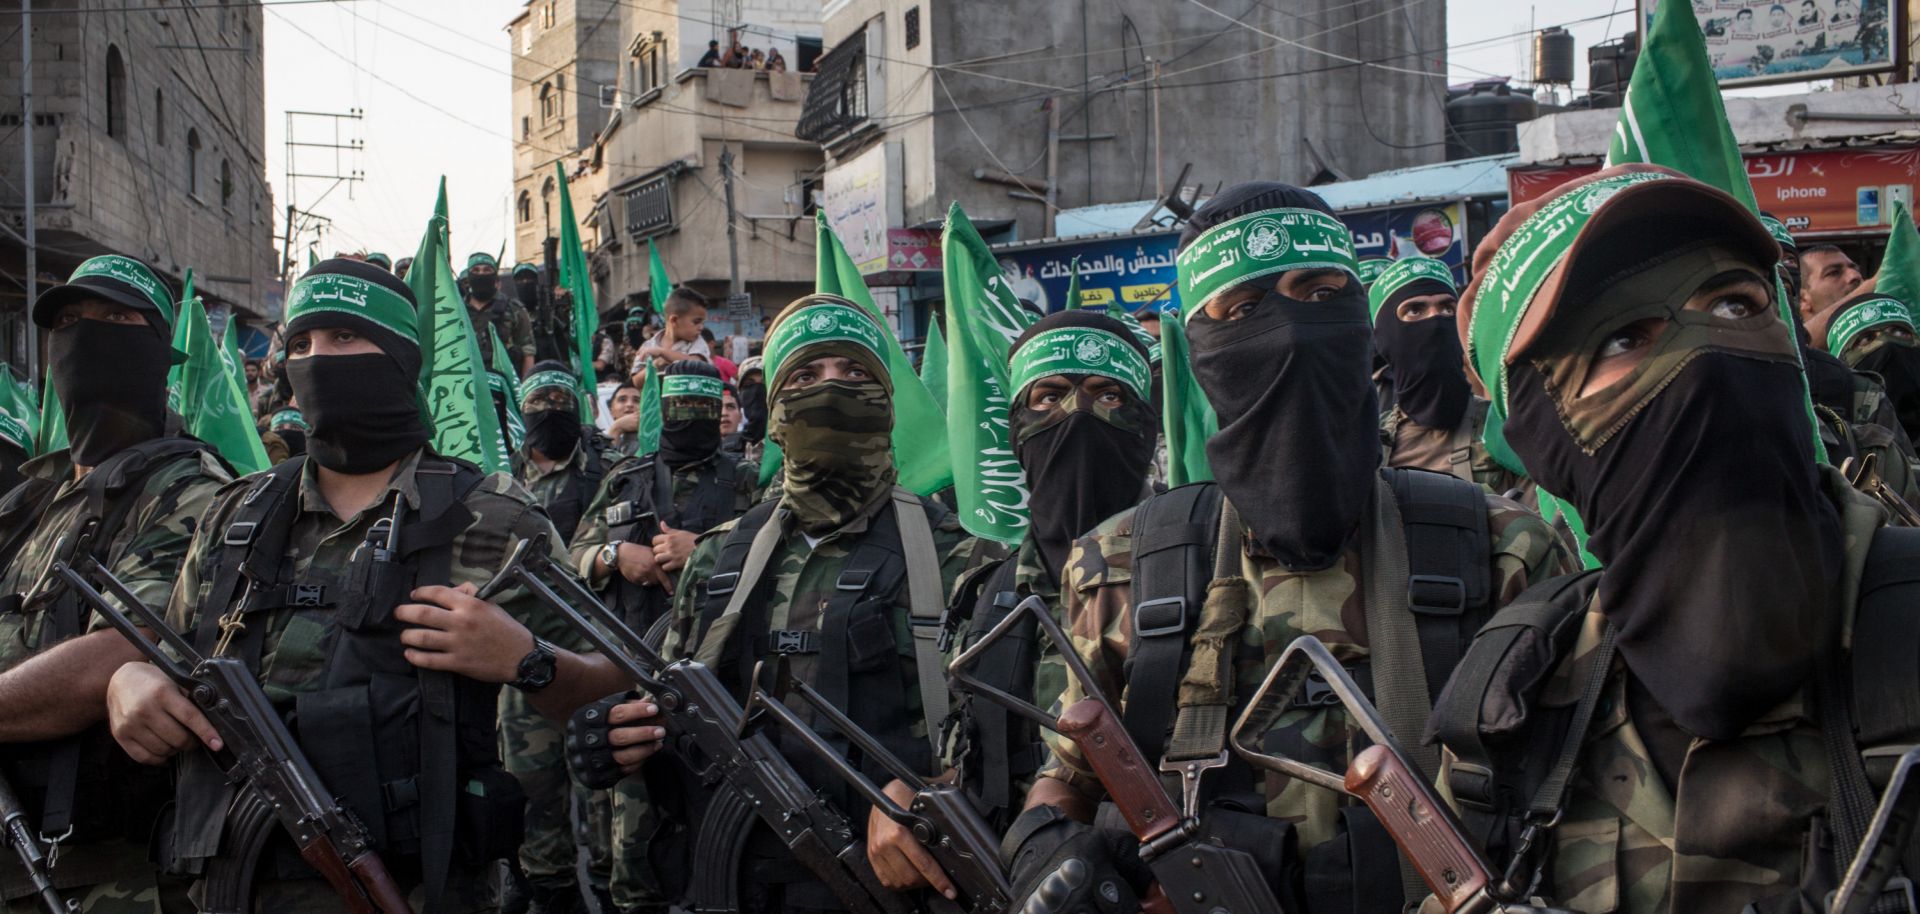 Palestinian Hamas militants are seen during a military show in Gaza City, Gaza, on July 20, 2017.